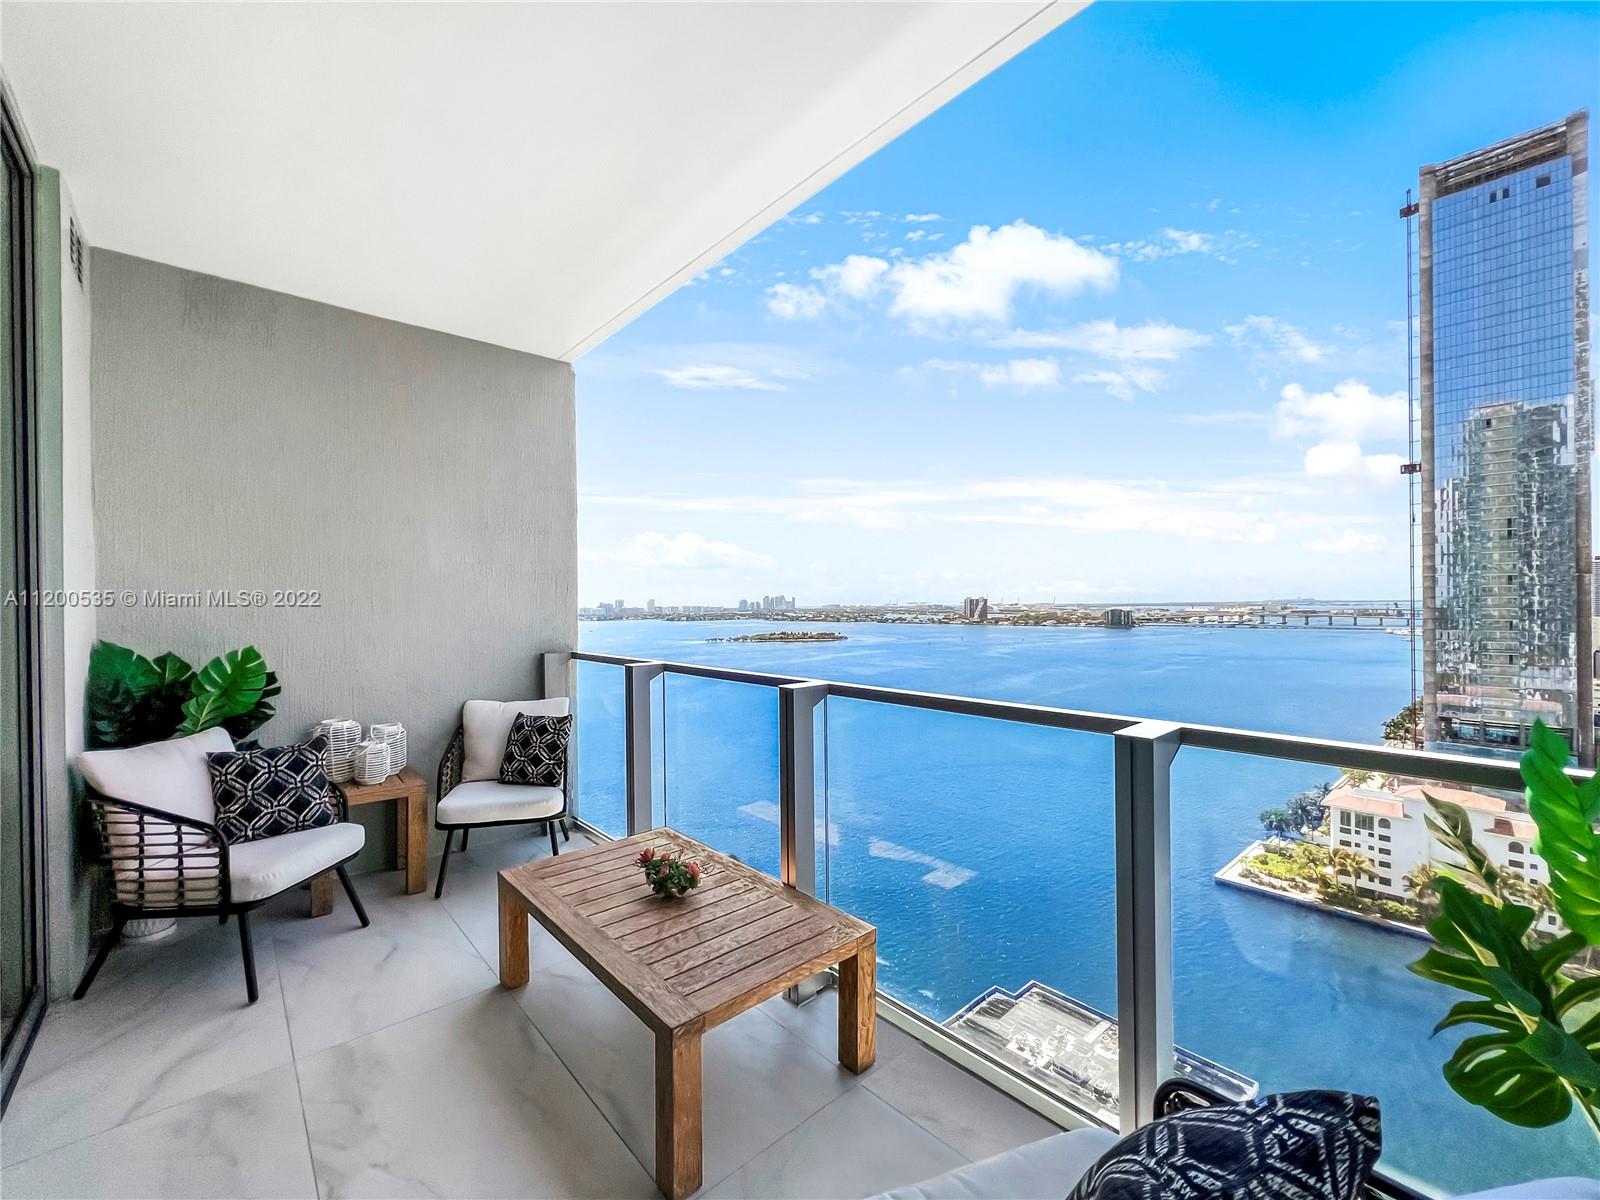 Hear the bay breezes passing over palm leaves, bask in the sun, and take in the beauty of Biscayne Bay w/southern views of Biscayne Bay & Edgewater through floor-to-ceiling windows & doors. 

This fabulous 1 bedroom + den w/2 bathrooms includes 1 parking spot, private elevator w/foyer, spacious balconies, & Miele appliances.  

Building amenities are among the best in Edgewater w/concierge; security; valet; 2 tennis courts; basketball; dog park; Gorgeous Beach Club w/2 pool decks & cabanas, day beds, chaise lounges, & summer kitchens; spa w/ treatment rooms, locker rooms, sauna, & stream room; fitness center; library; theatre; pool tables; business center, & bay-walk! 

TENANT OCCUPIED.  MOVE IN 11/14/2022 OR BUY AS INVESTMENT.